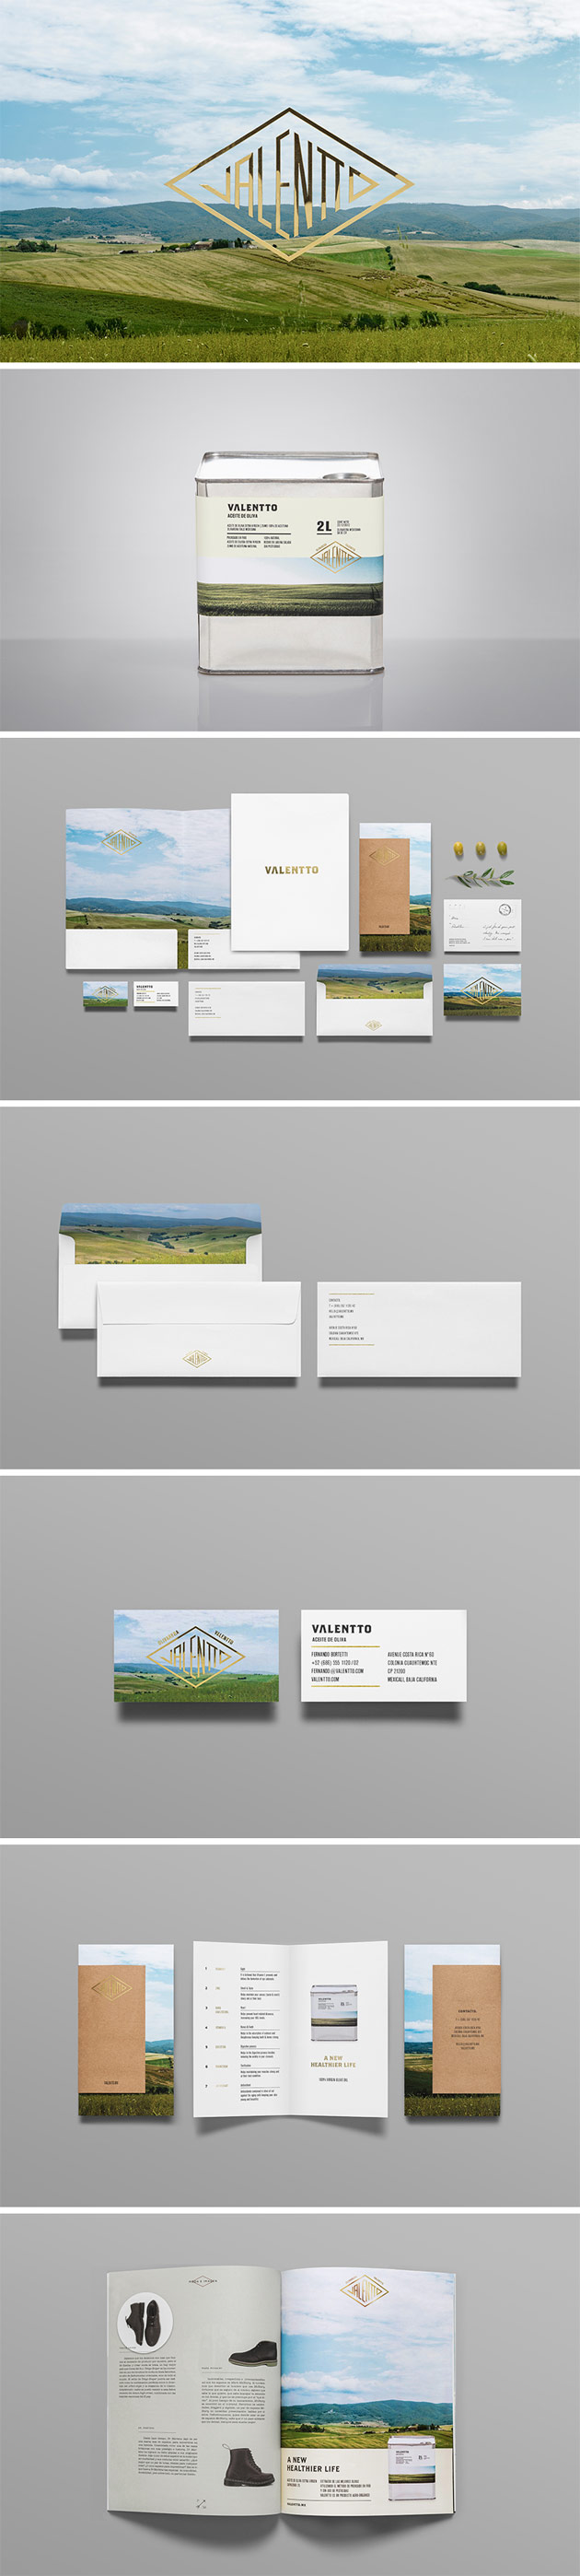 Valentto Product branding by Anagrama